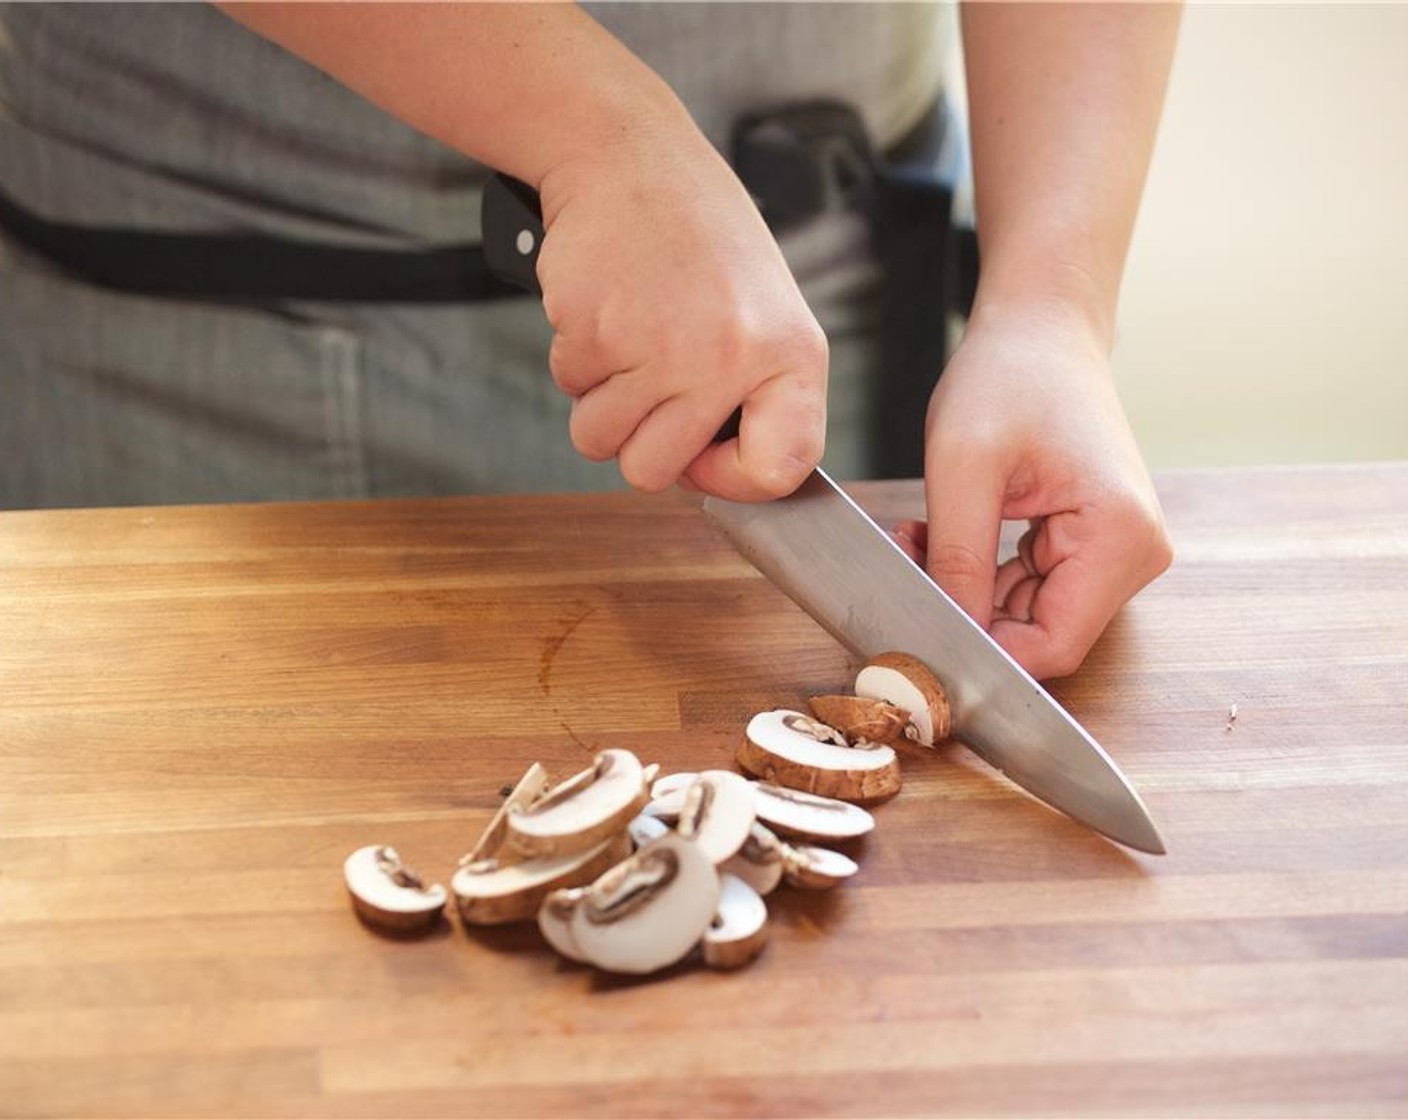 step 1 Peel and finely chop fresh Fresh Ginger (1 Tbsp) and set aside. Using Onion (1/2), peel and slice into quarter inch pieces. Peel Carrot (1) and slice on a diagonal. Slice Cremini Mushroom (1 cup) into quarter inch thin slices and set aside.